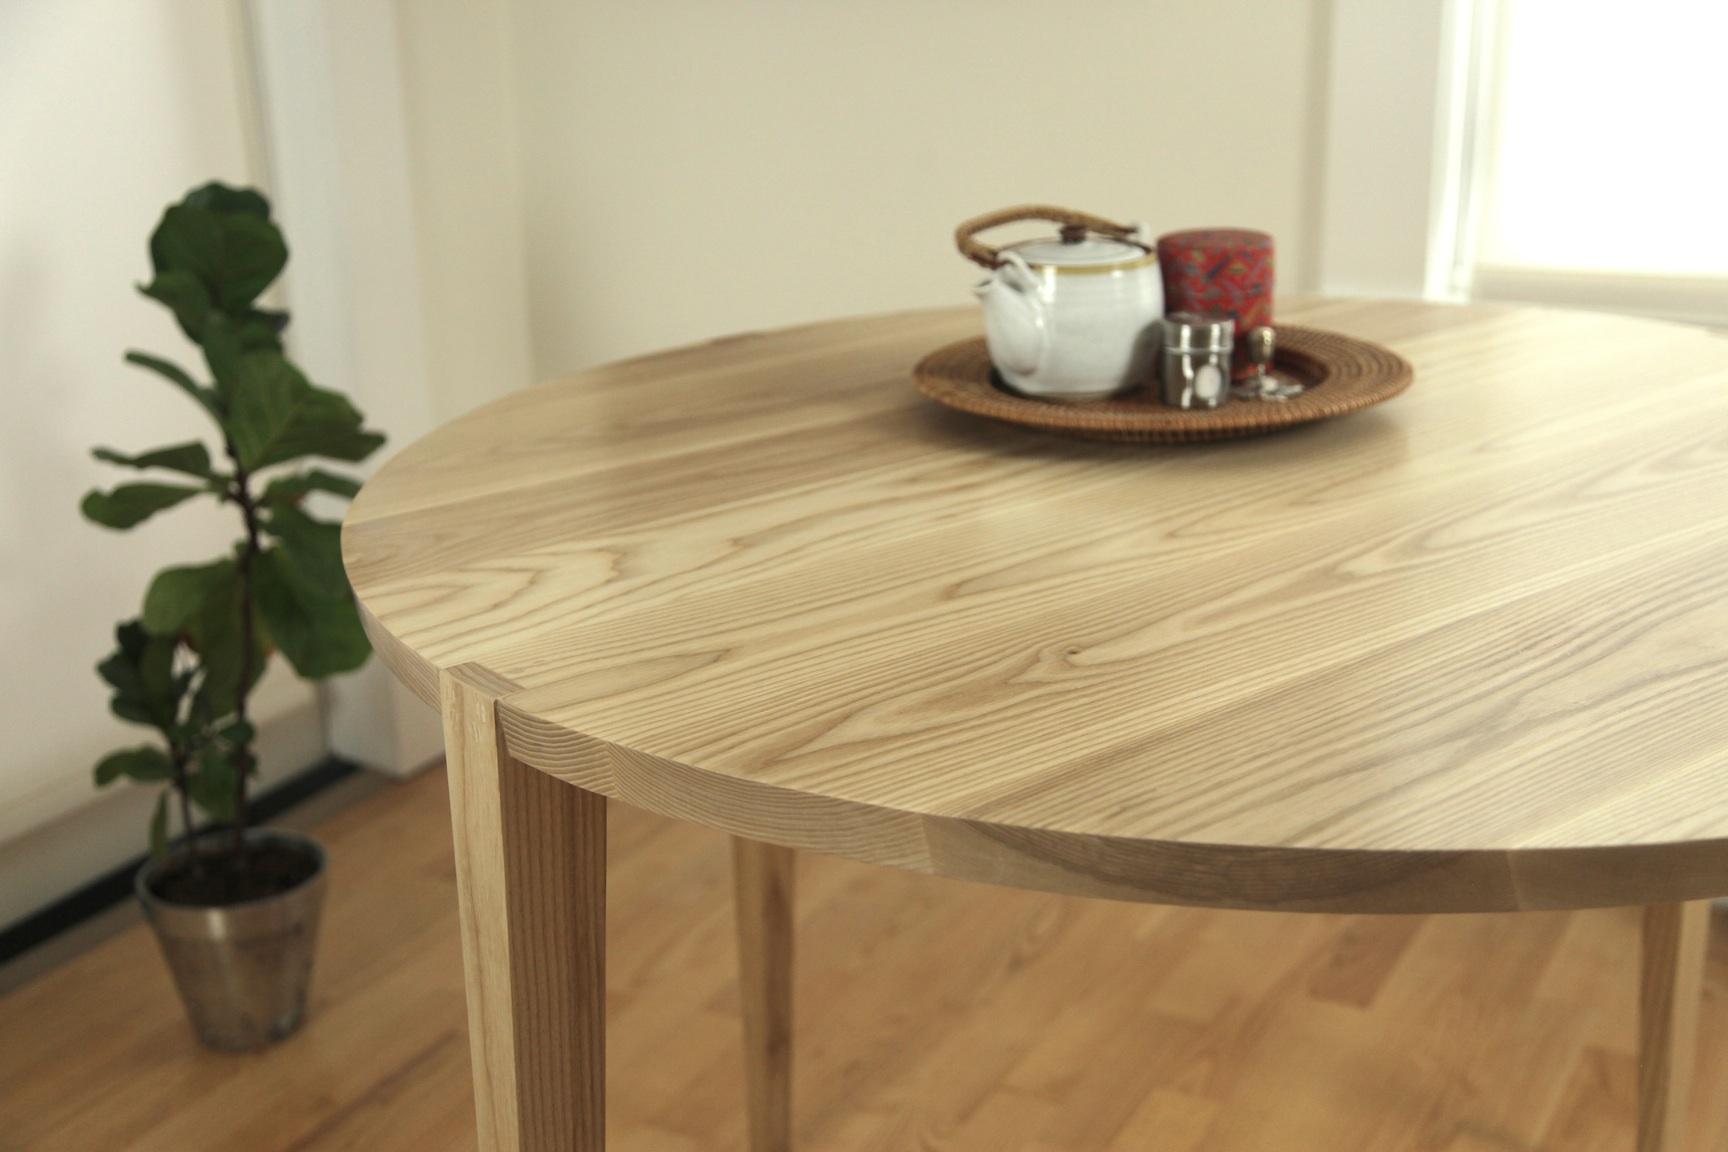 Begin your day with clarity. The clean modern lines of our handcrafted Oslo round dining table will bring focused attention and ambience to your kitchen nook, or bustling neighborhood cafe. Built with exquisite attention to detail, and completed